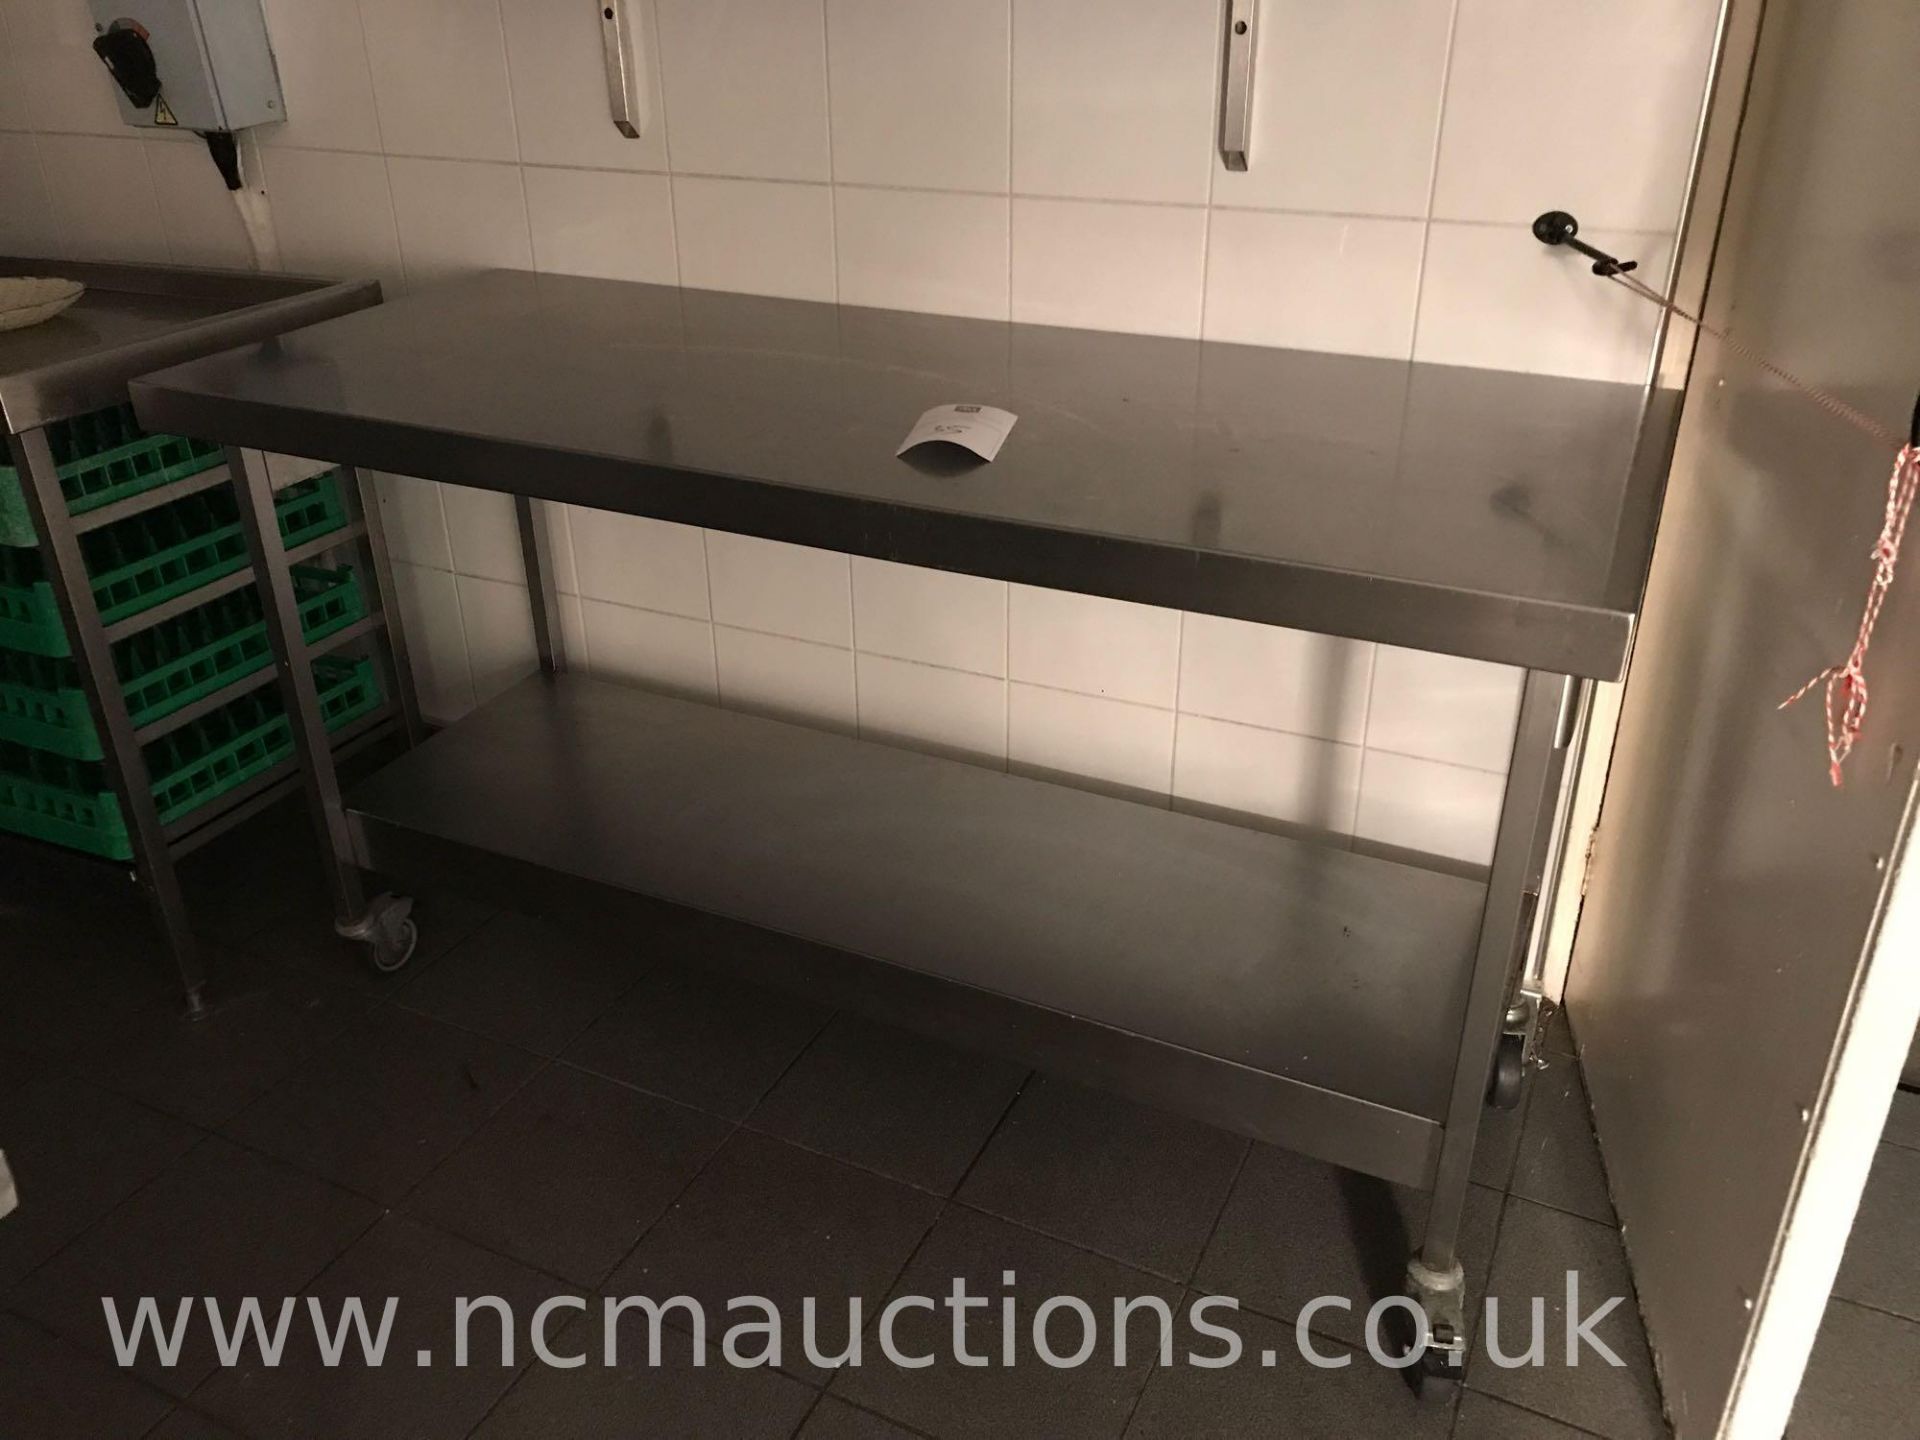 Stainless steel counter and 2x shelf